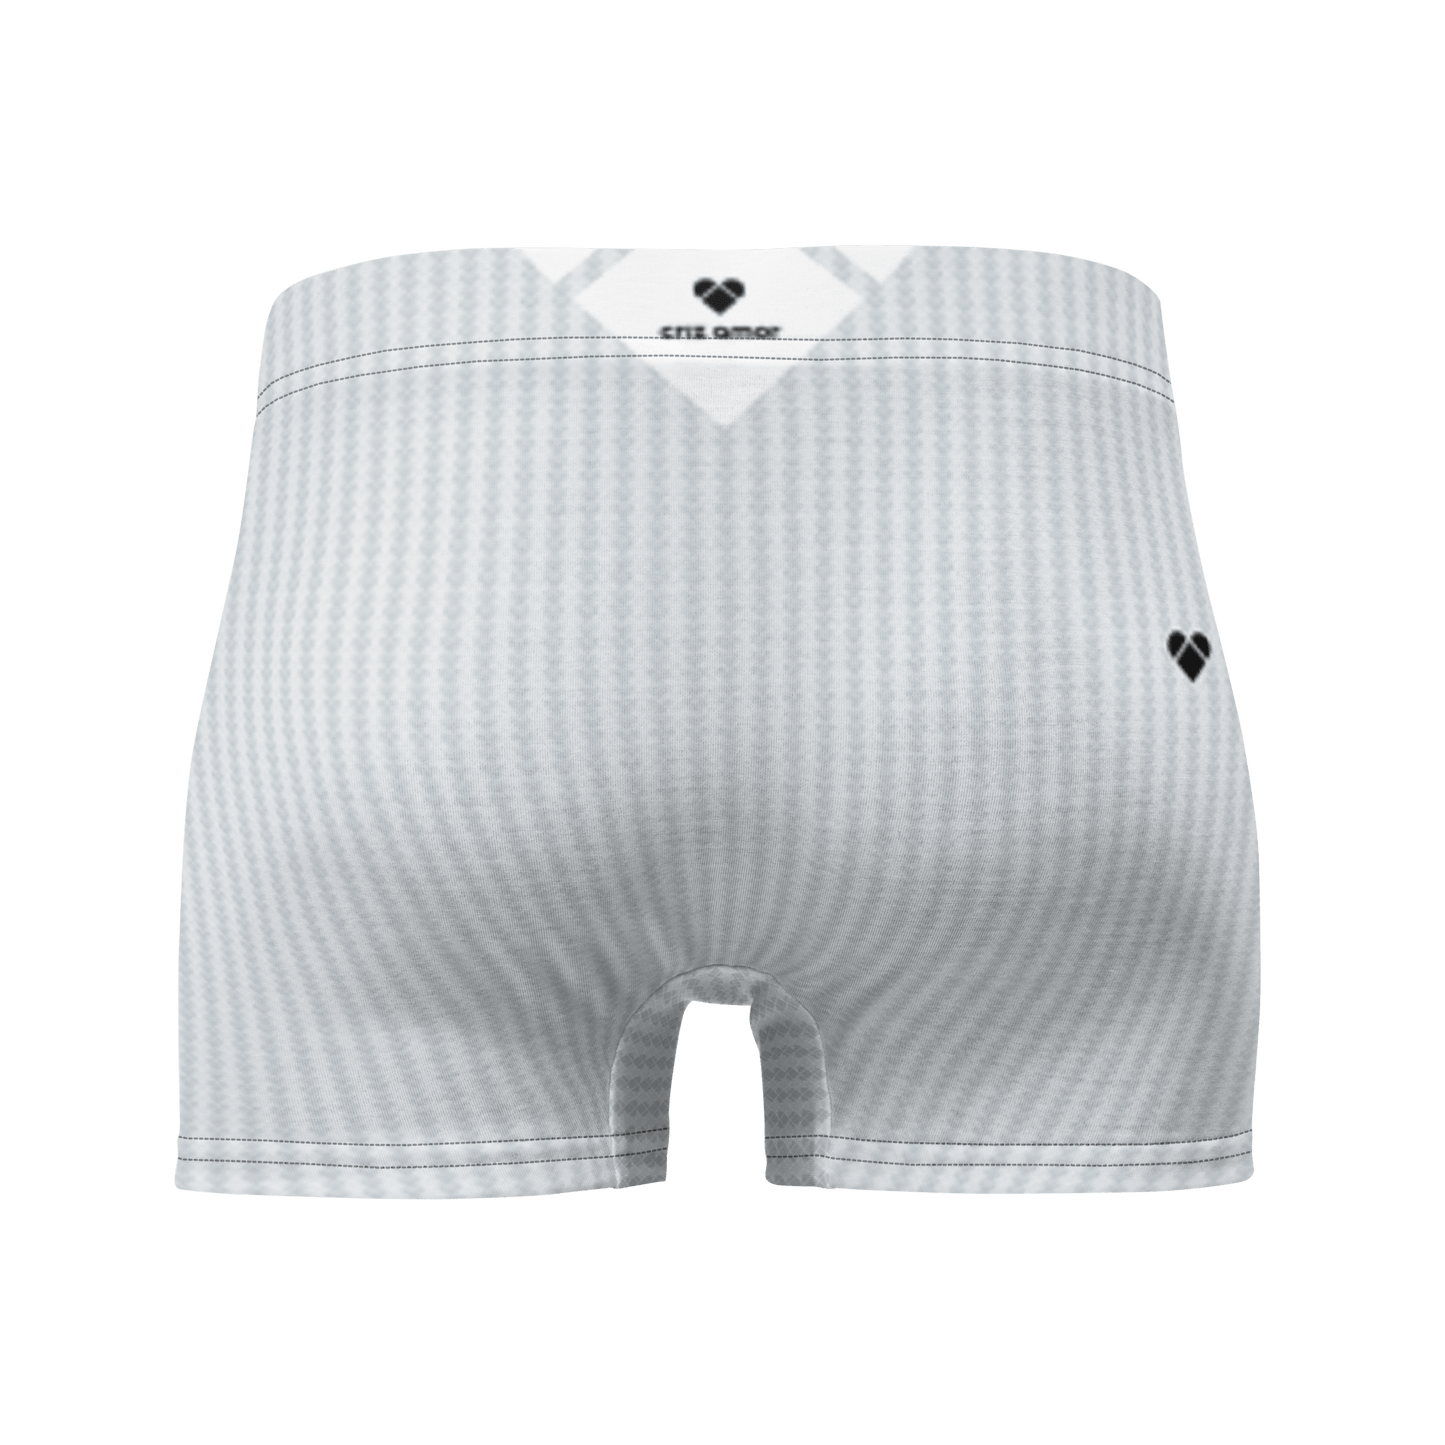 Boxers - Light gray men's boxers from the Amor Primero Collection